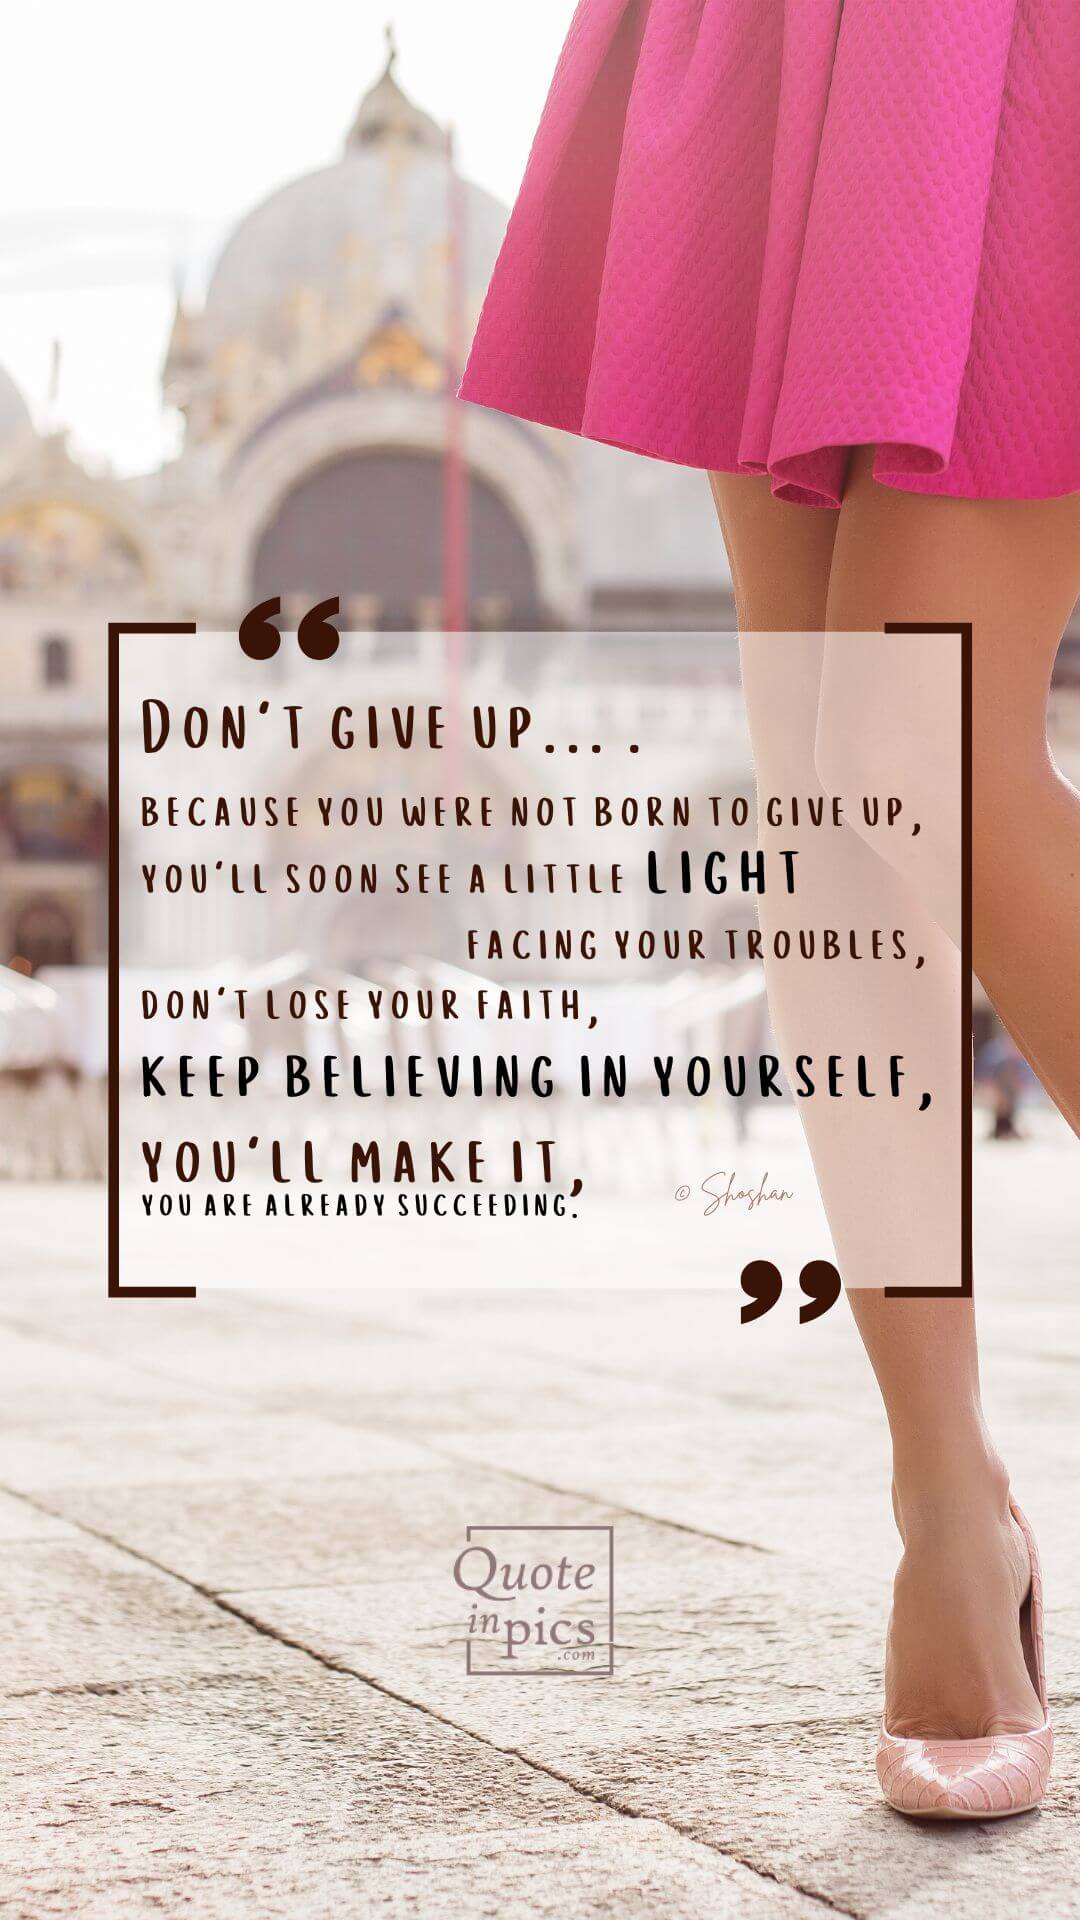 Don't give up... because you were not born to give up